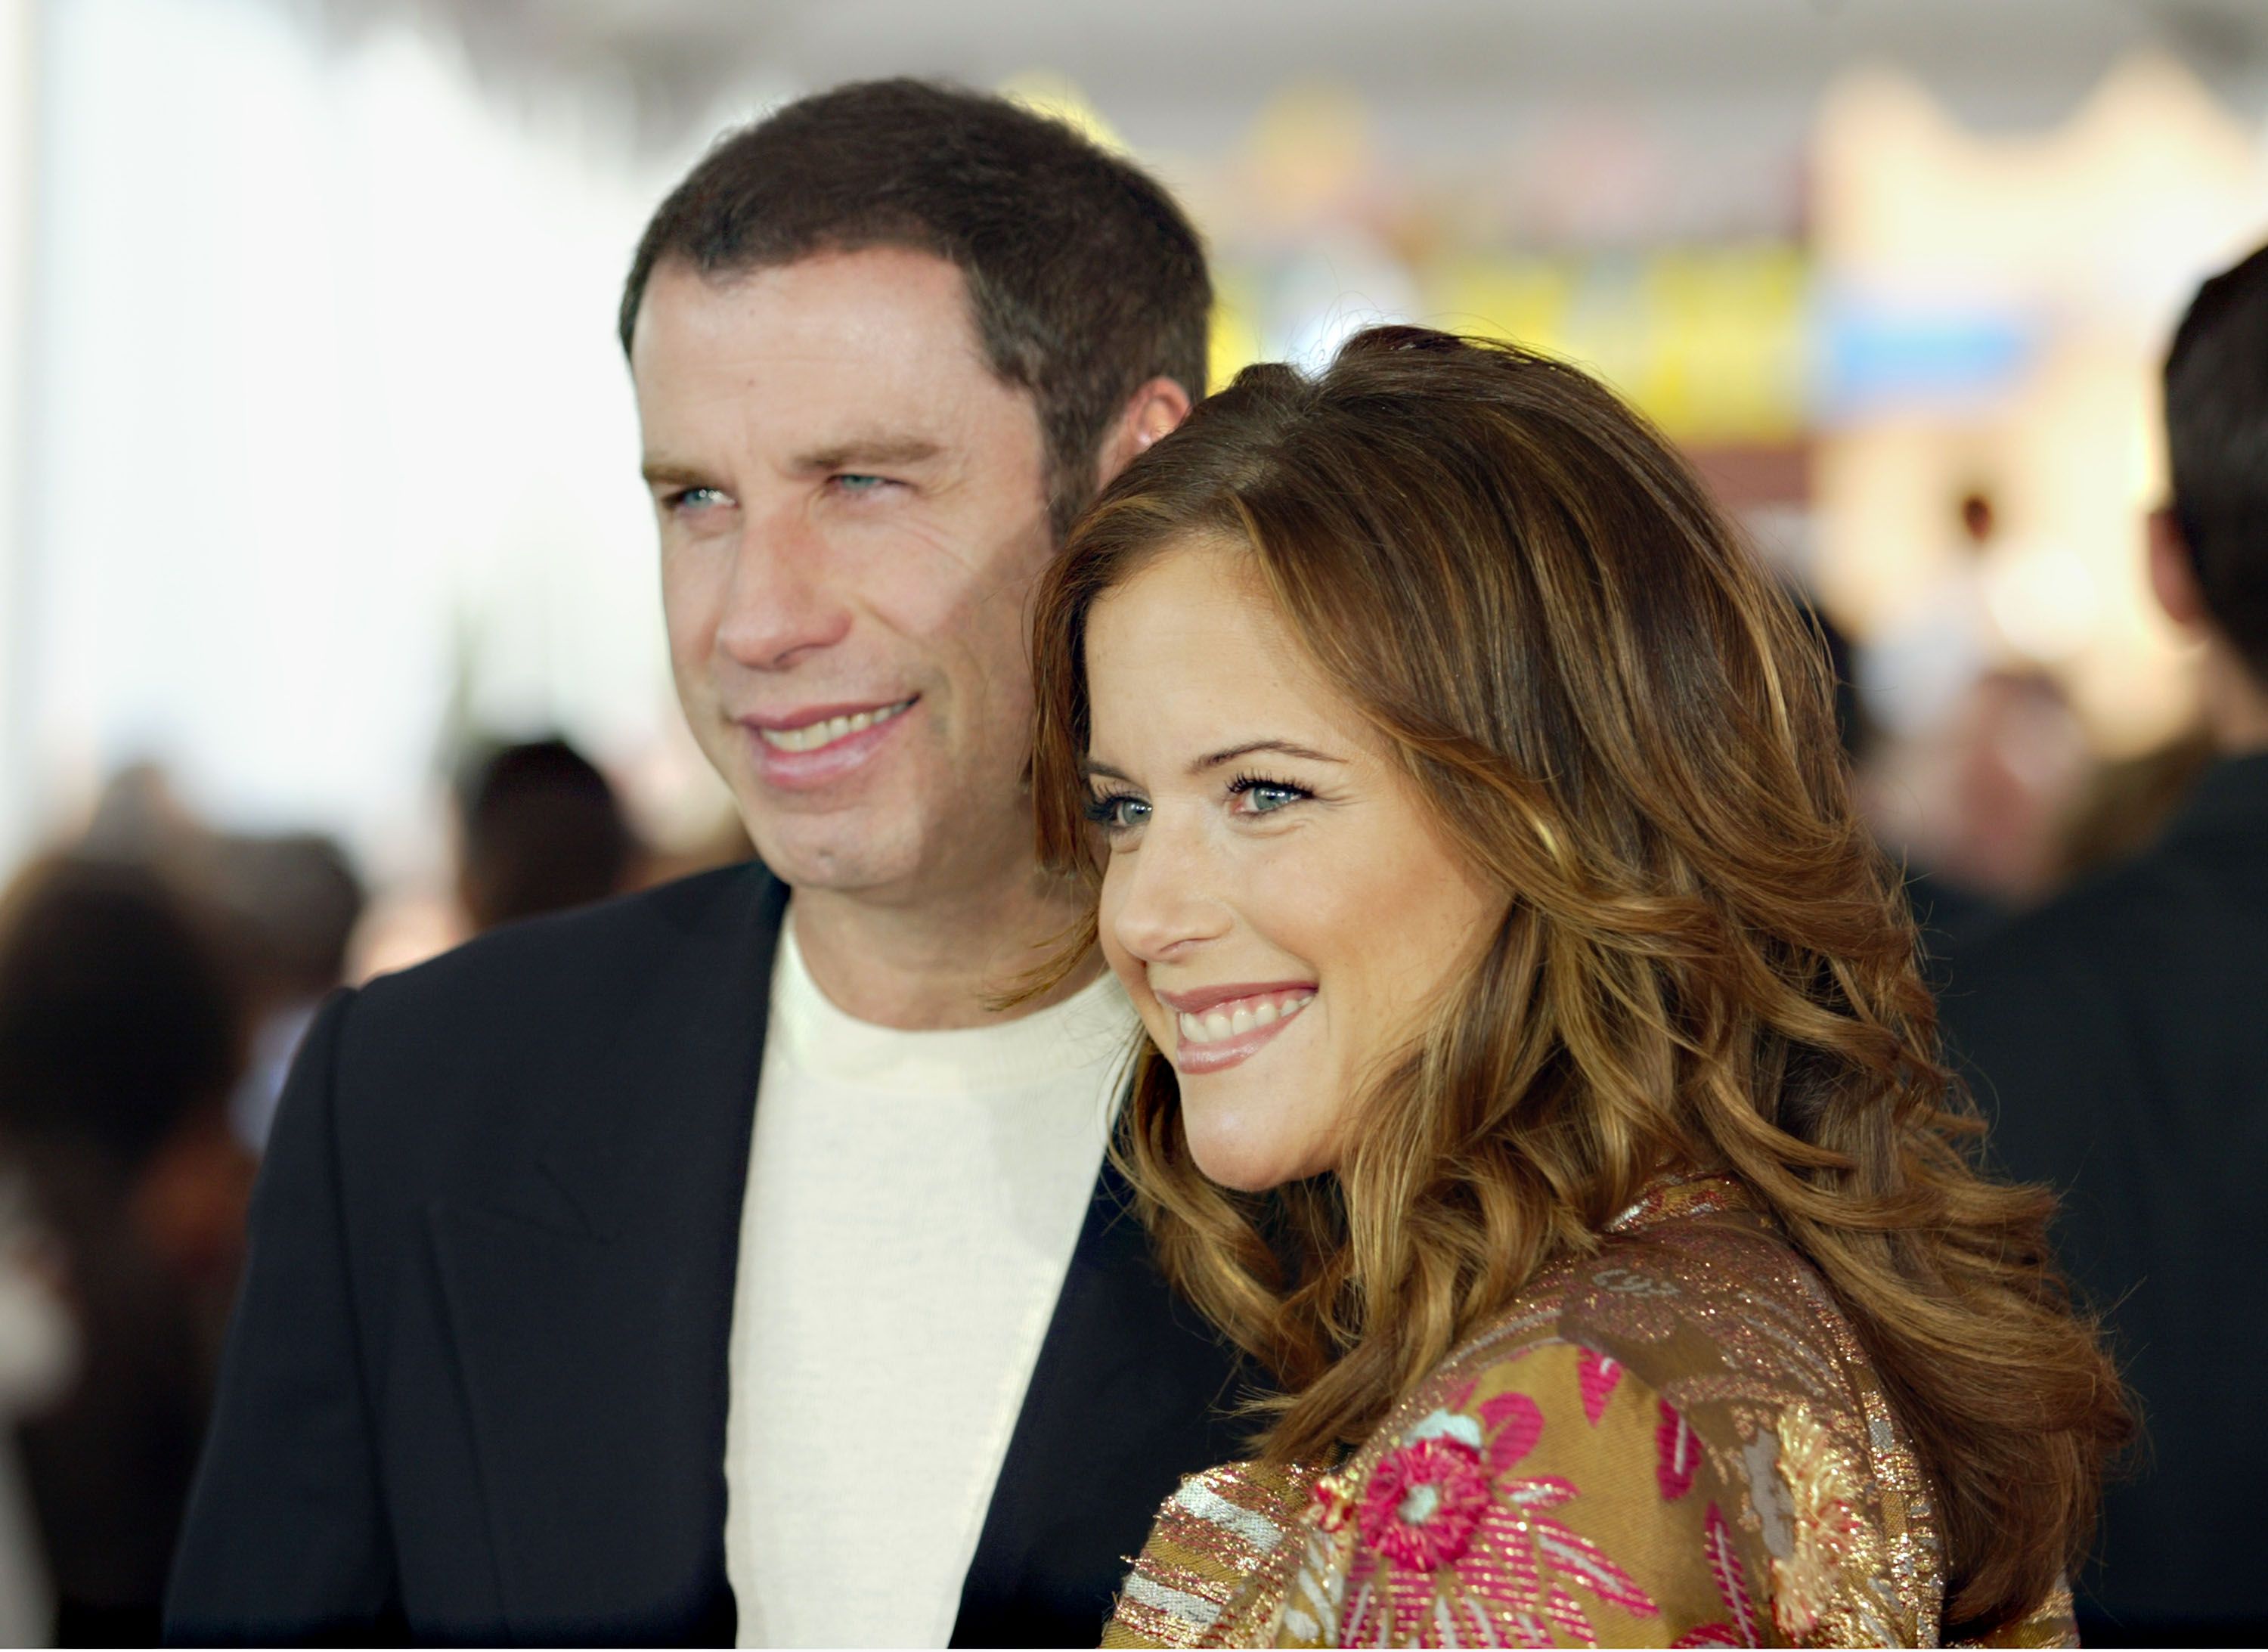 John Travolta and his late wife Kelly Preston at the world premiere of "Dr. Seuss' The Cat in the Hat" at Universal Studios, November 8, 2003 | Photo: Getty Images